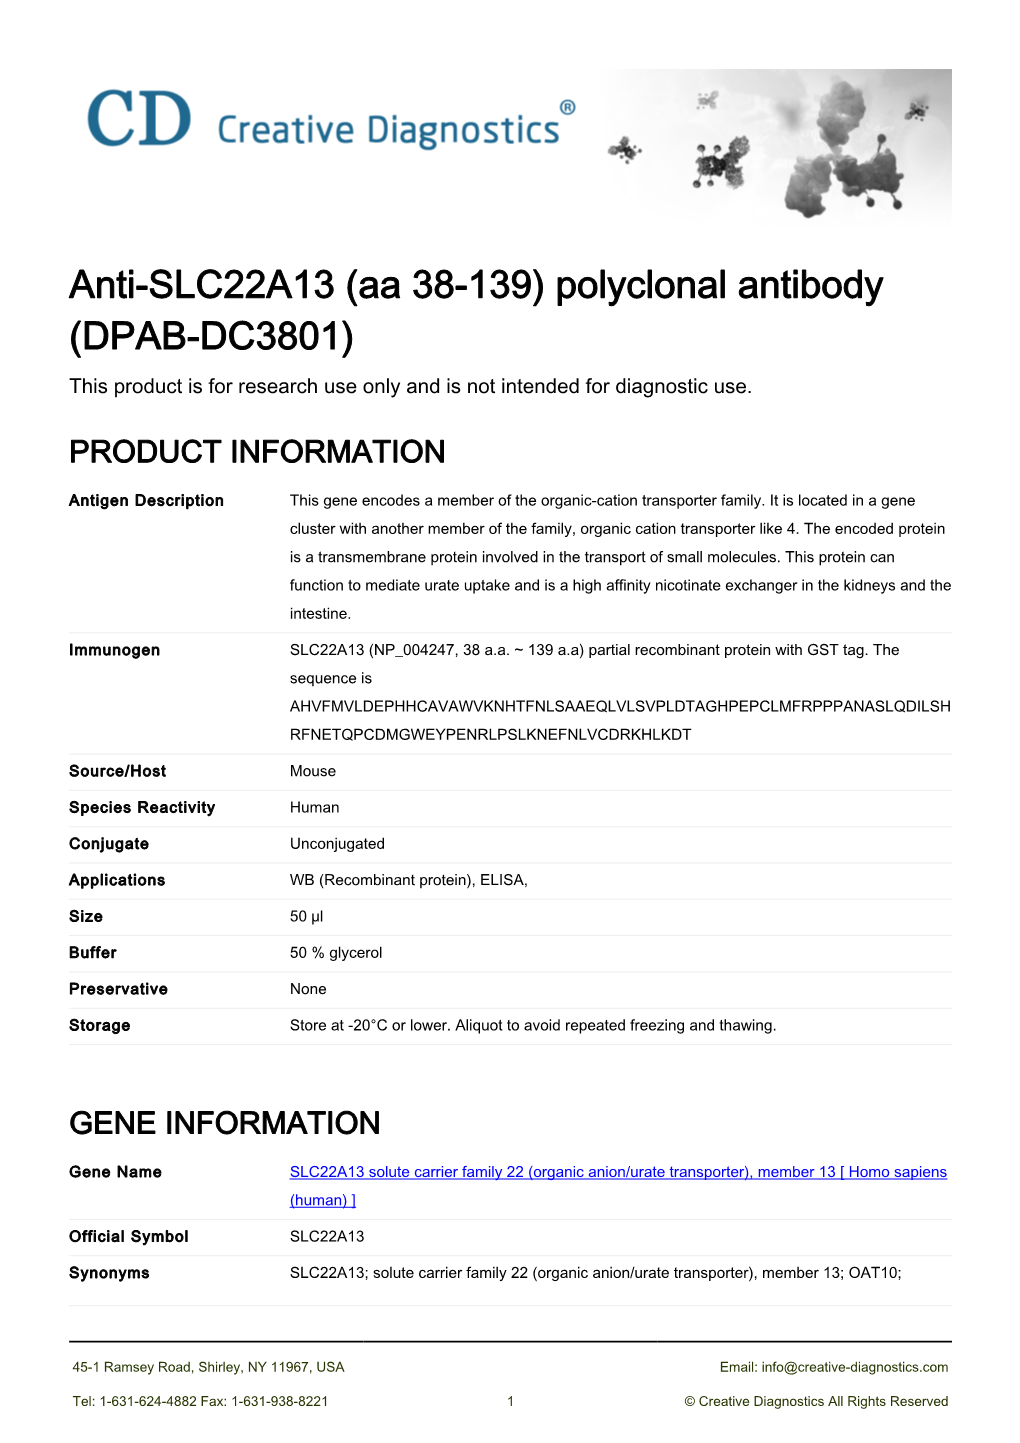 Anti-SLC22A13 (Aa 38-139) Polyclonal Antibody (DPAB-DC3801) This Product Is for Research Use Only and Is Not Intended for Diagnostic Use